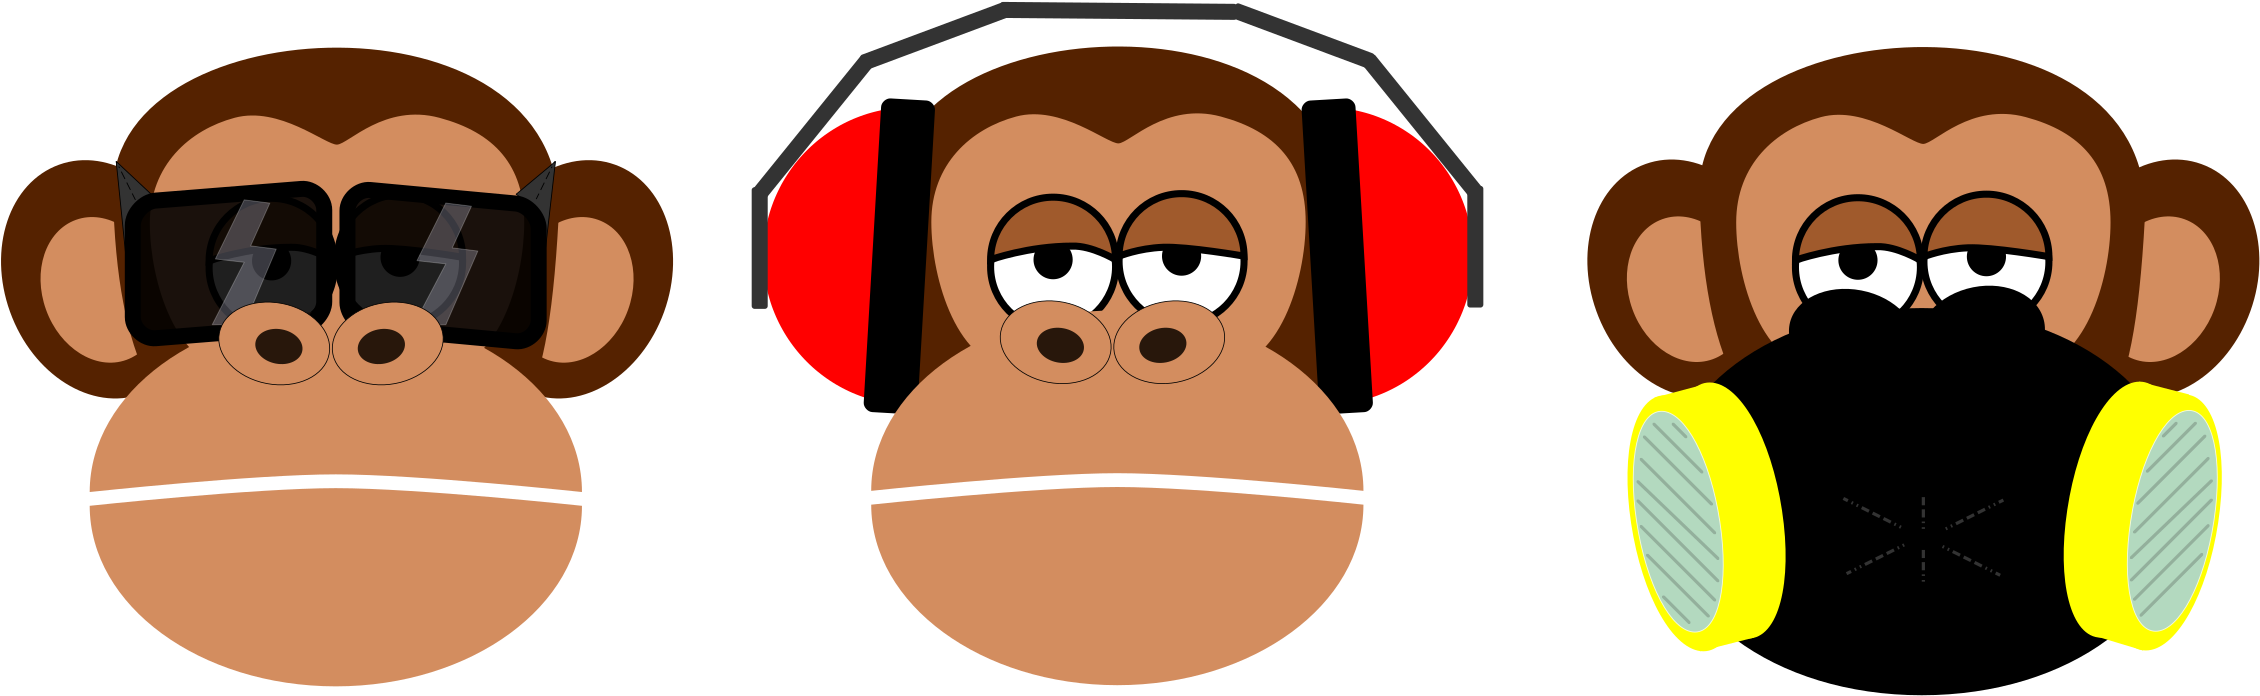 Monkey_ Emoji_ Variations_with_ Accessories PNG